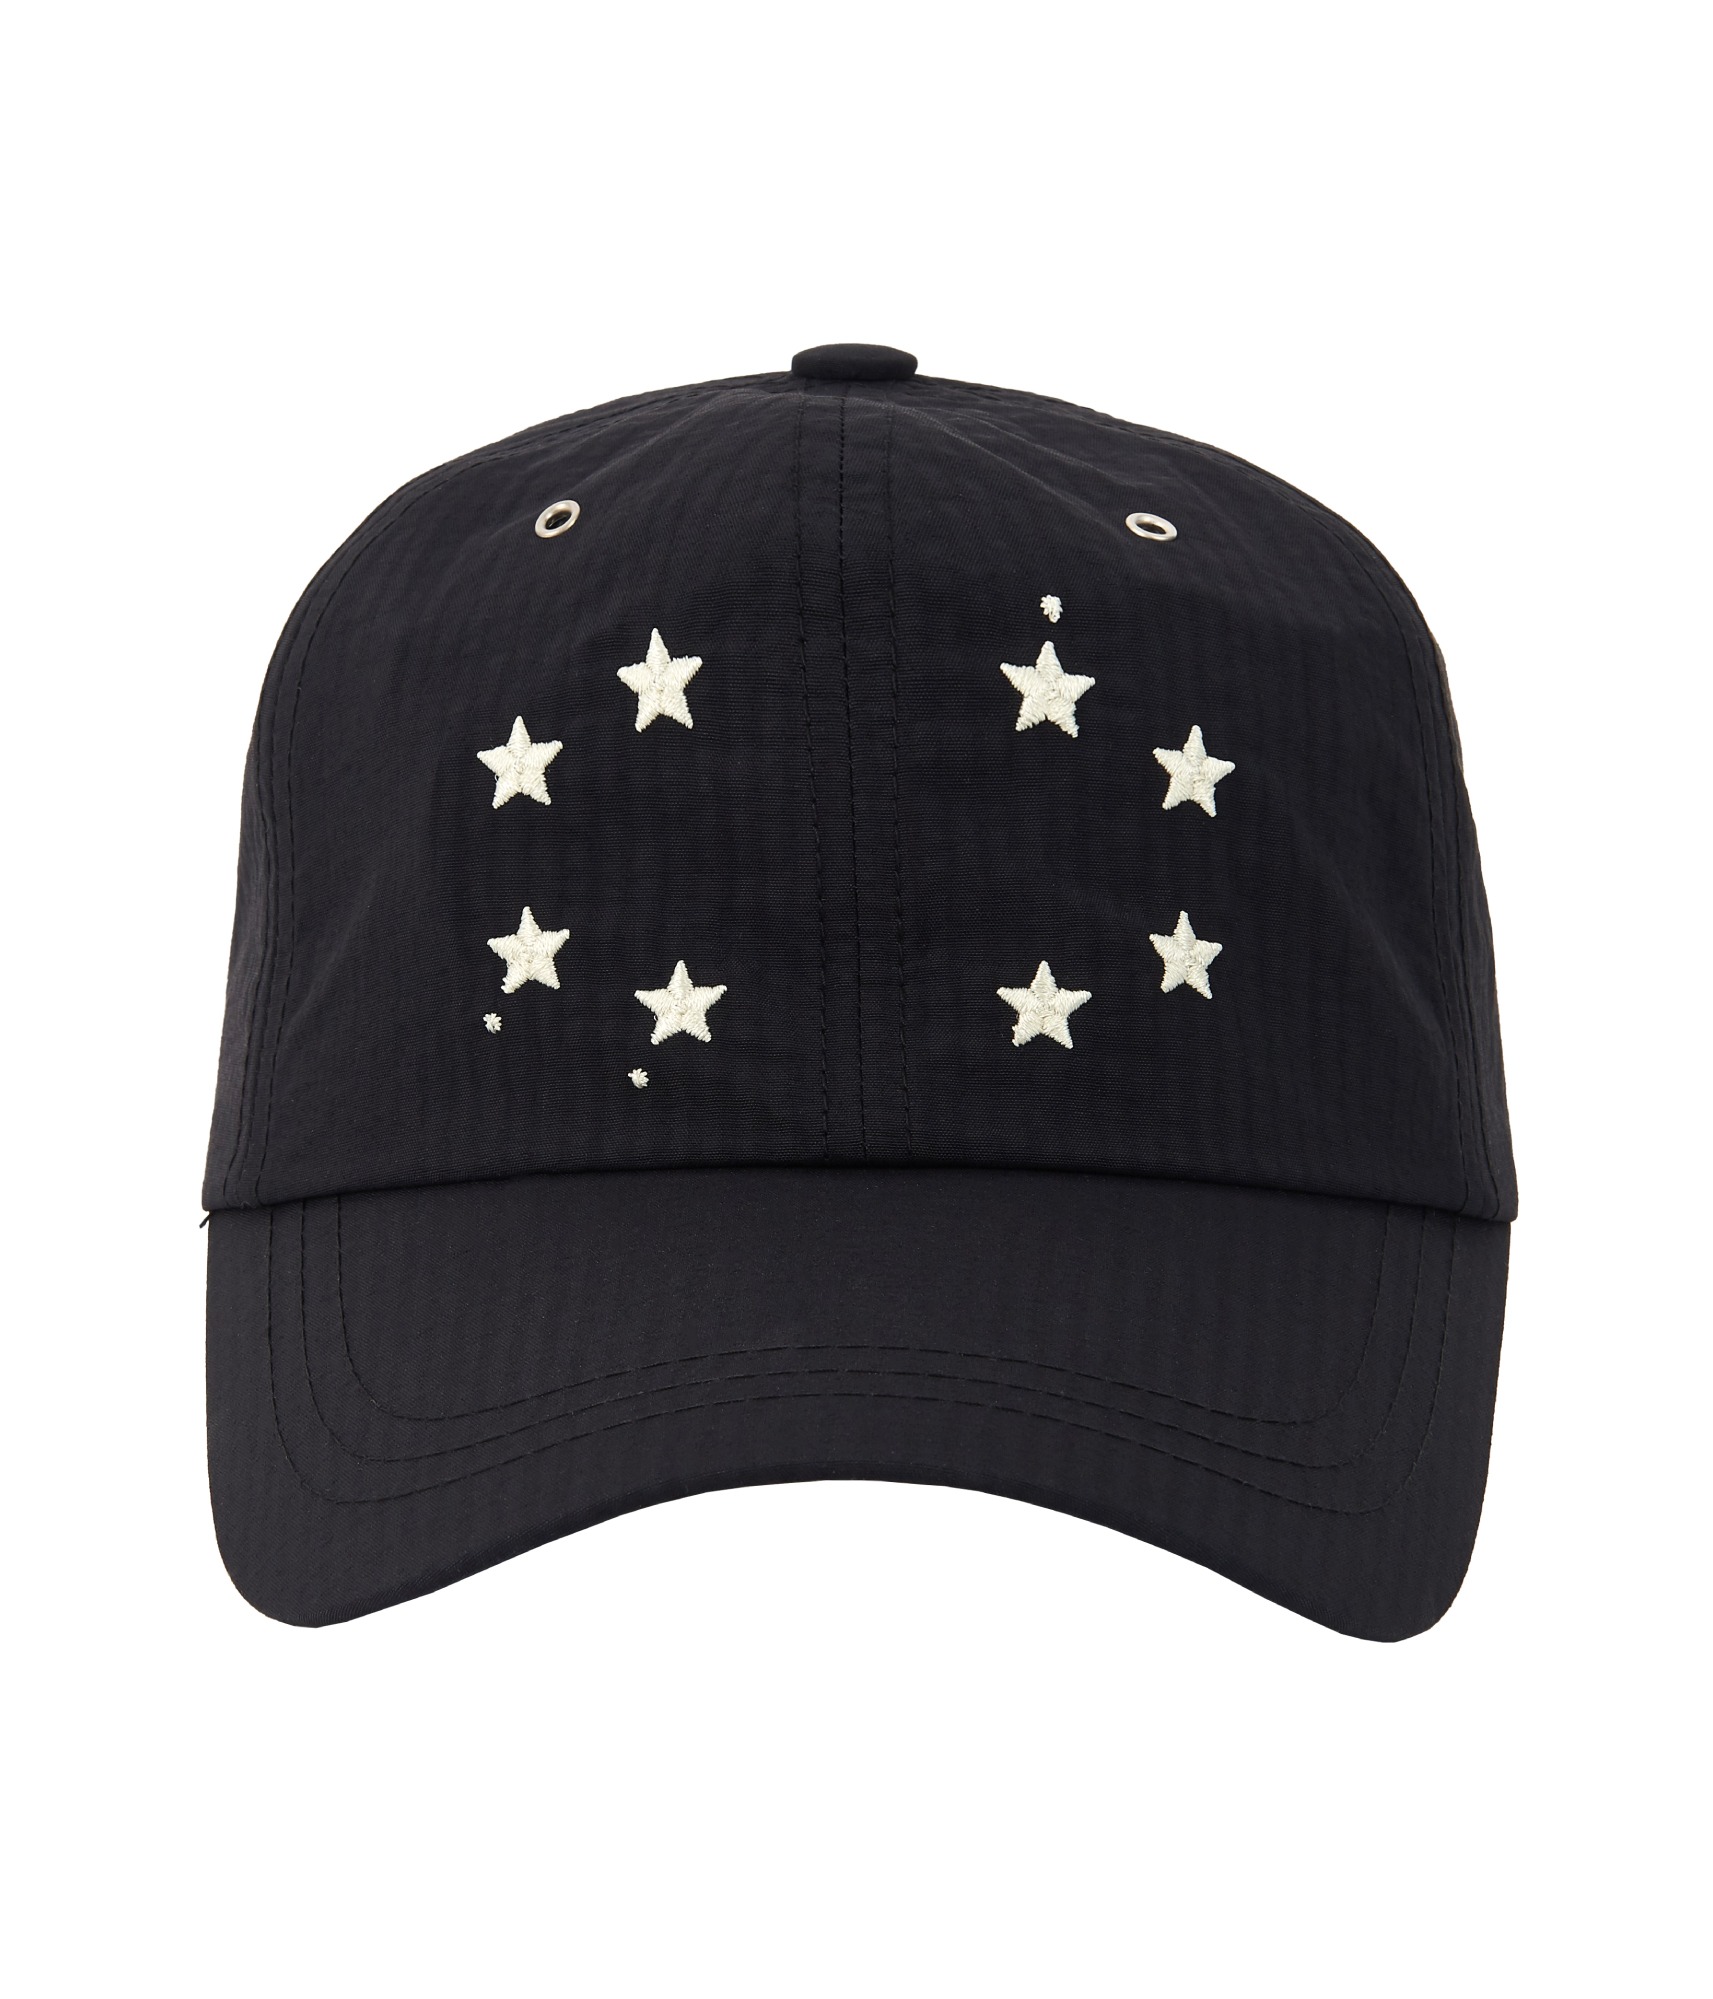 STAR EMBROIDERED BALL CAP (BLACK)